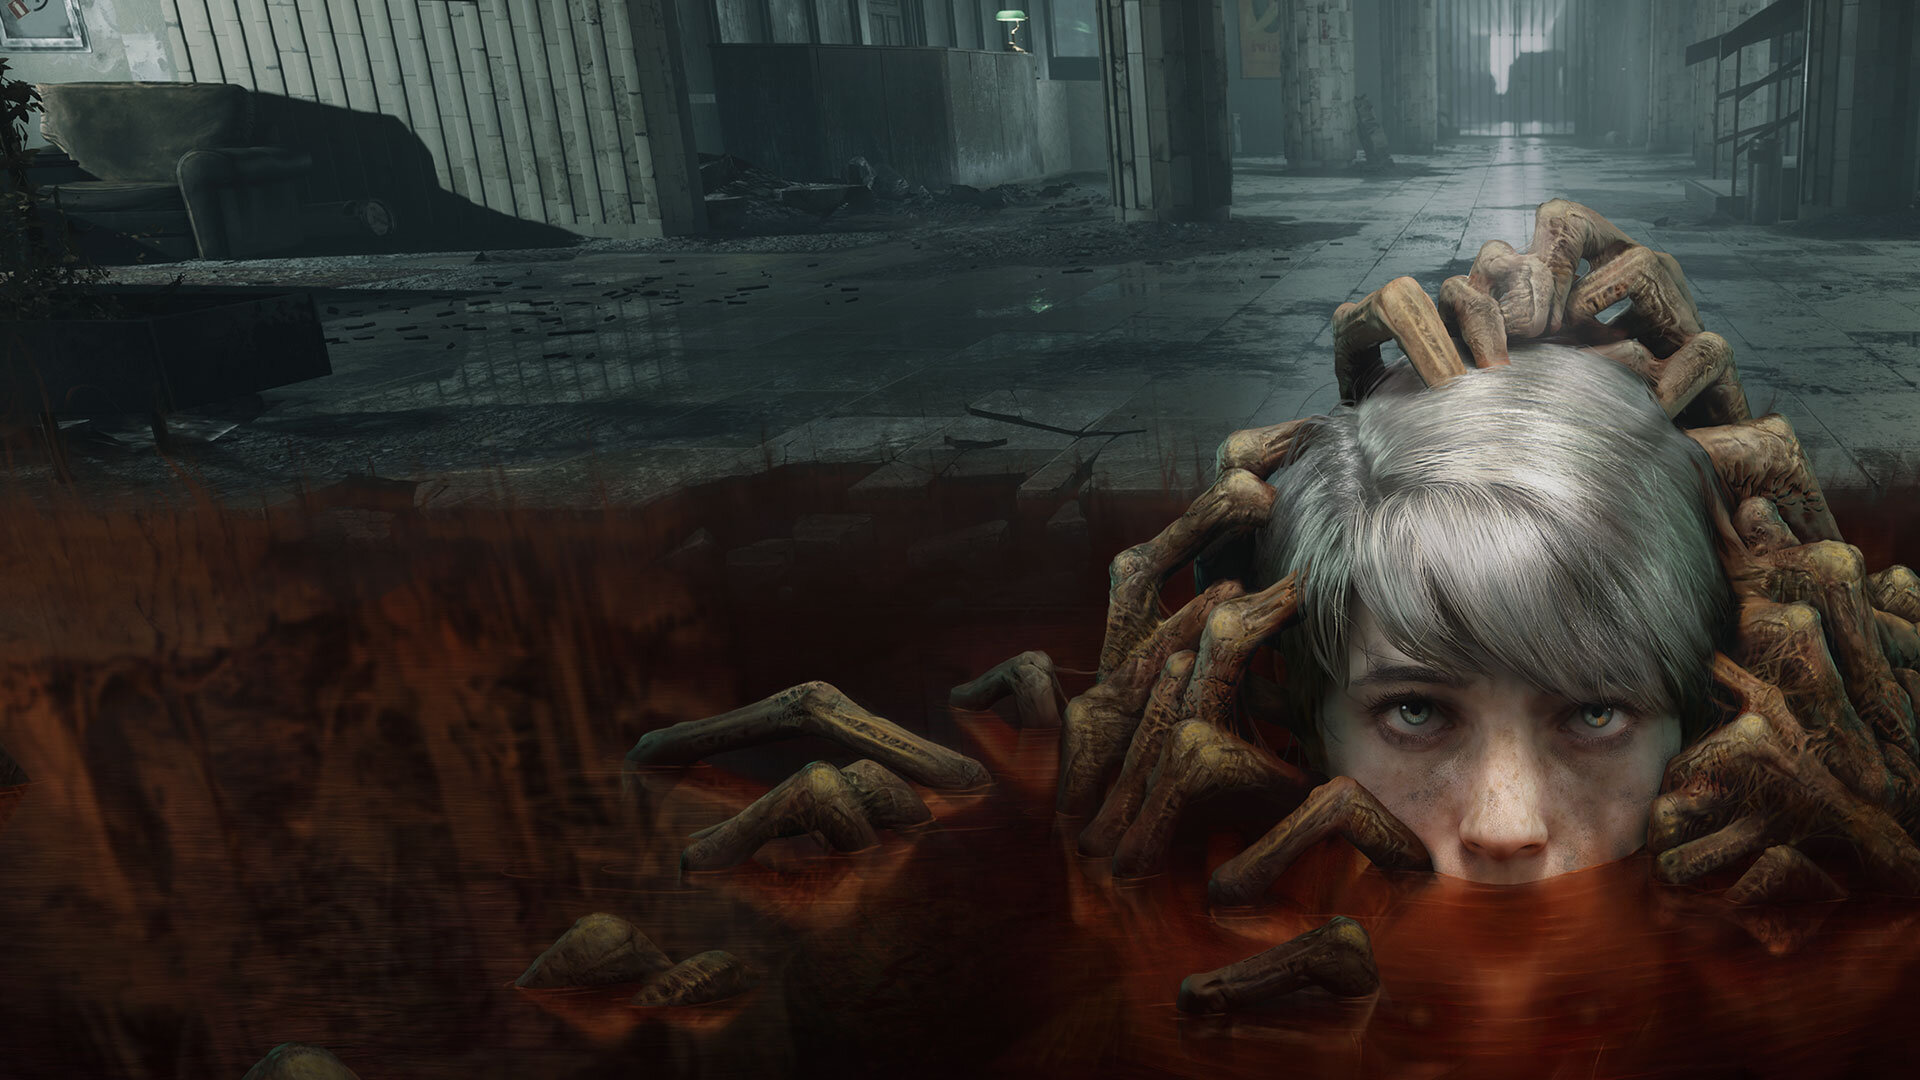 Bloober Team Could Make Sequels to Observer and The Medium